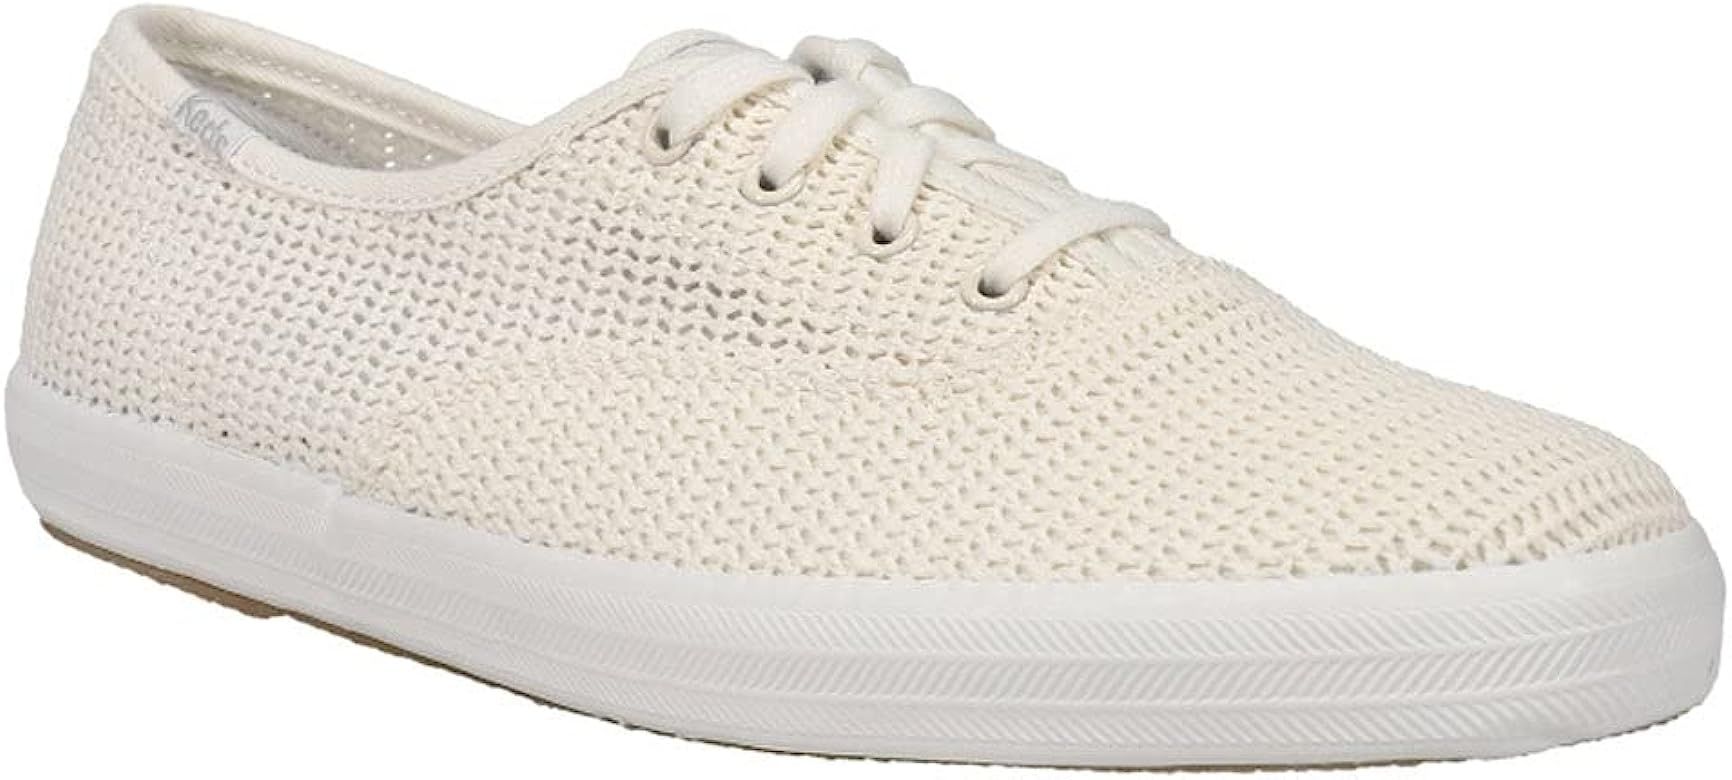 Keds Womens Champion Organic Cotton Sneakers Shoes Casual - White | Amazon (US)